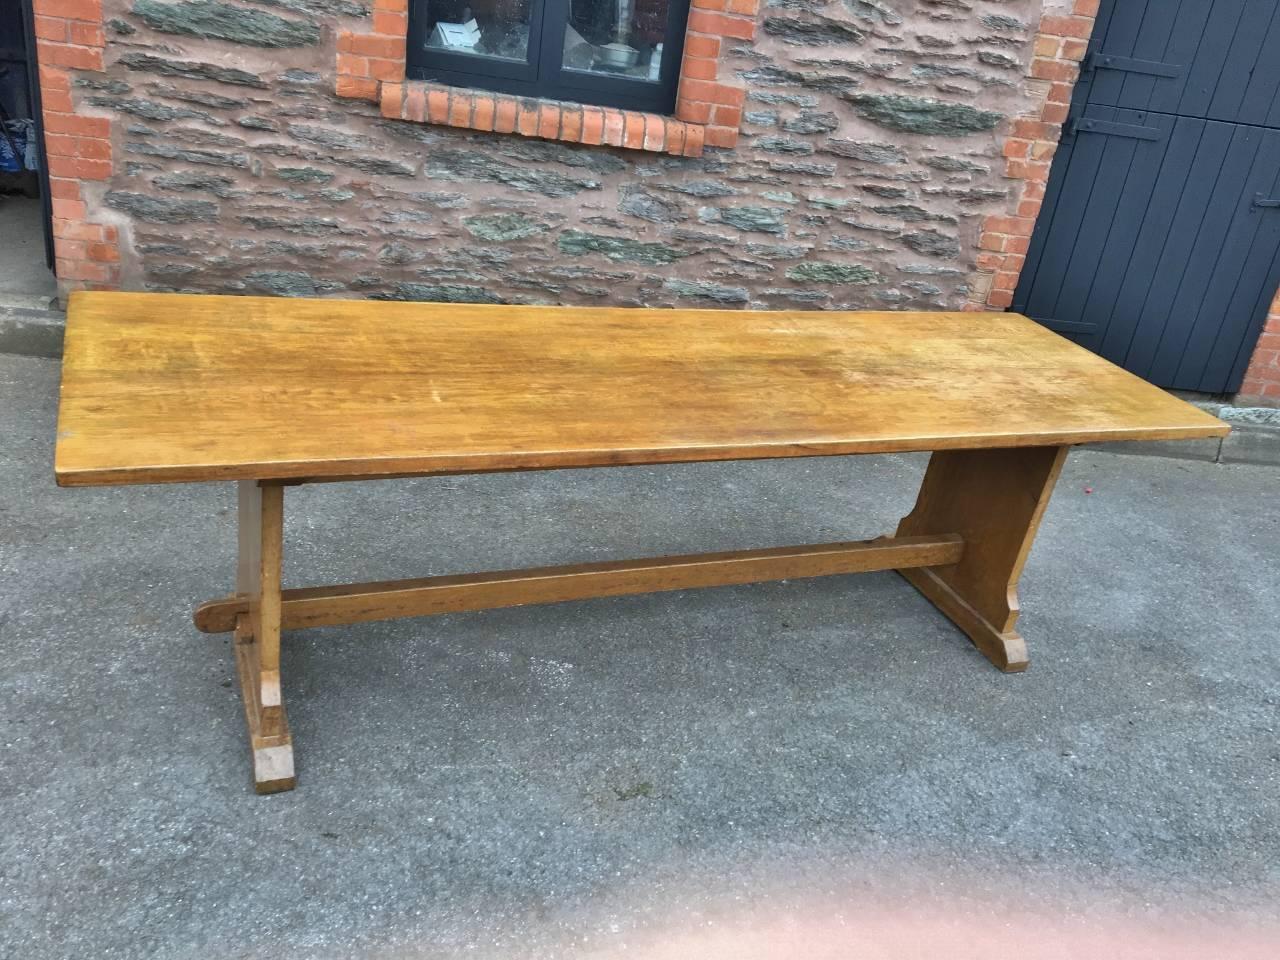 Aesthetic Movement 20th Century Oak Dining Table, Arts and Crafts Era For Sale